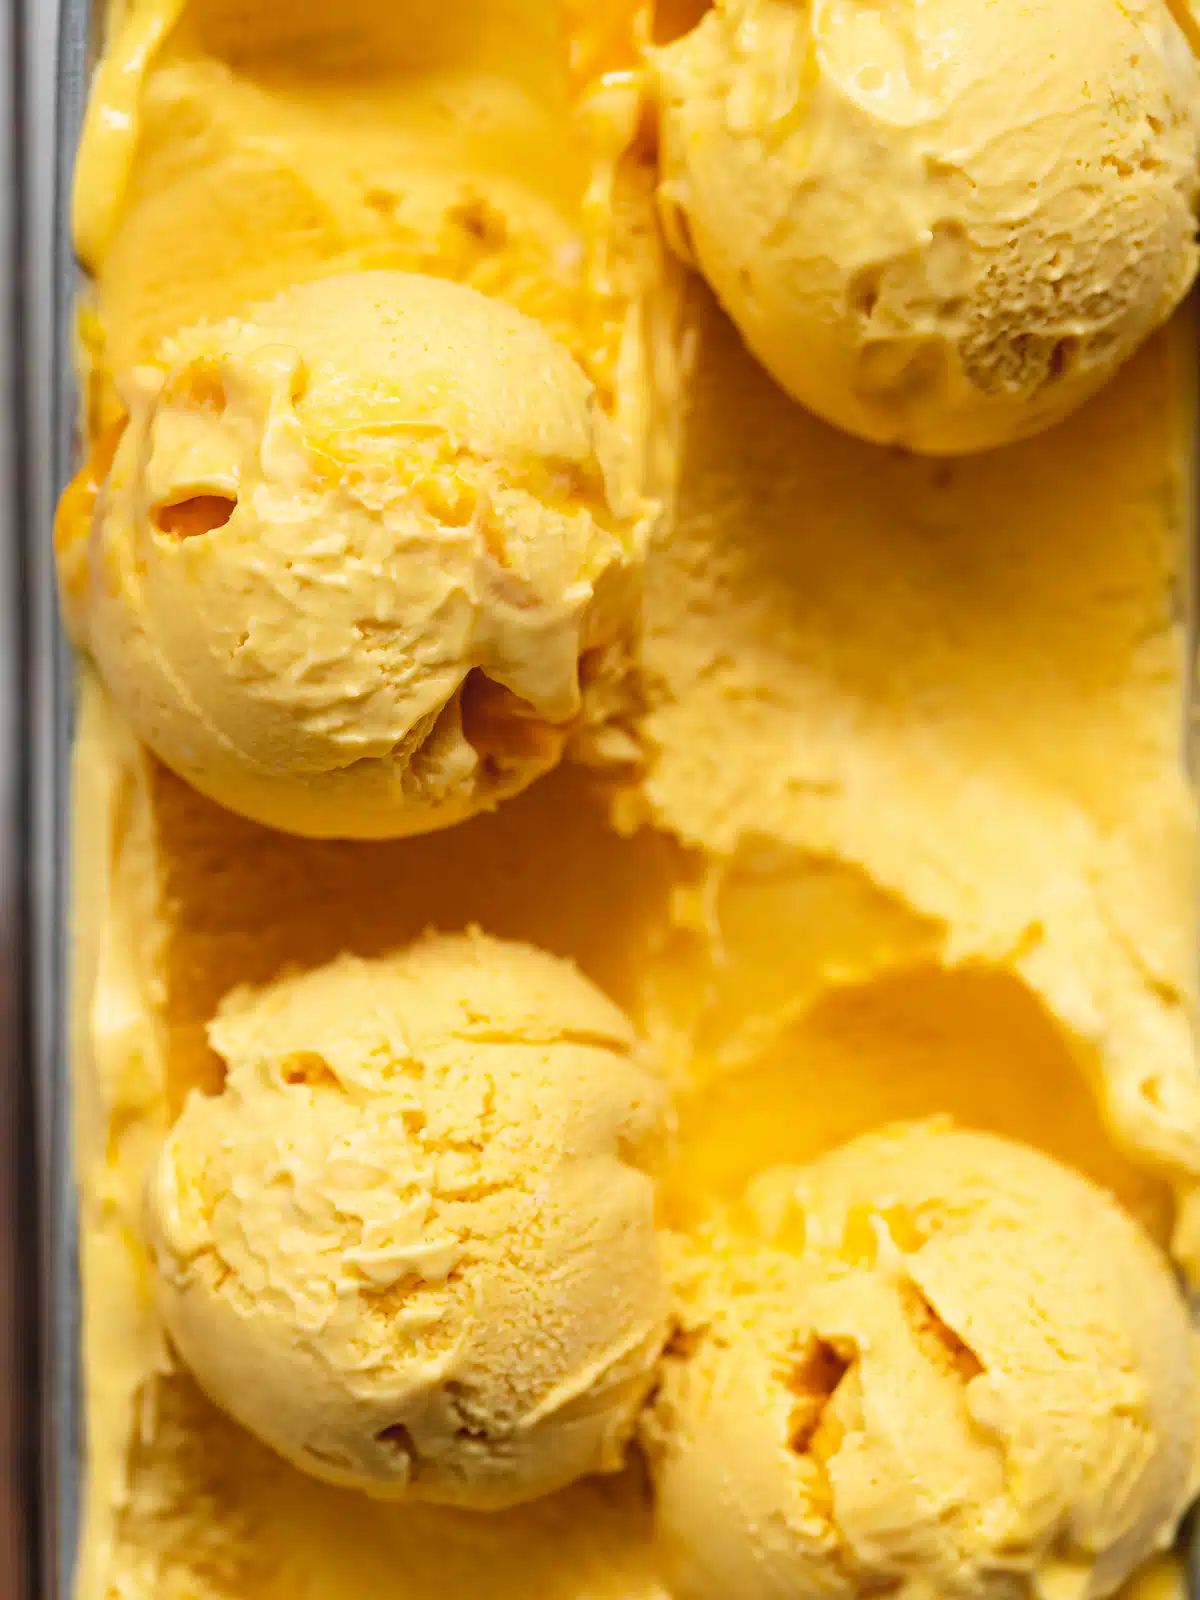 close up of mango ice cream scoops showing the incredible thick and creamy texture.